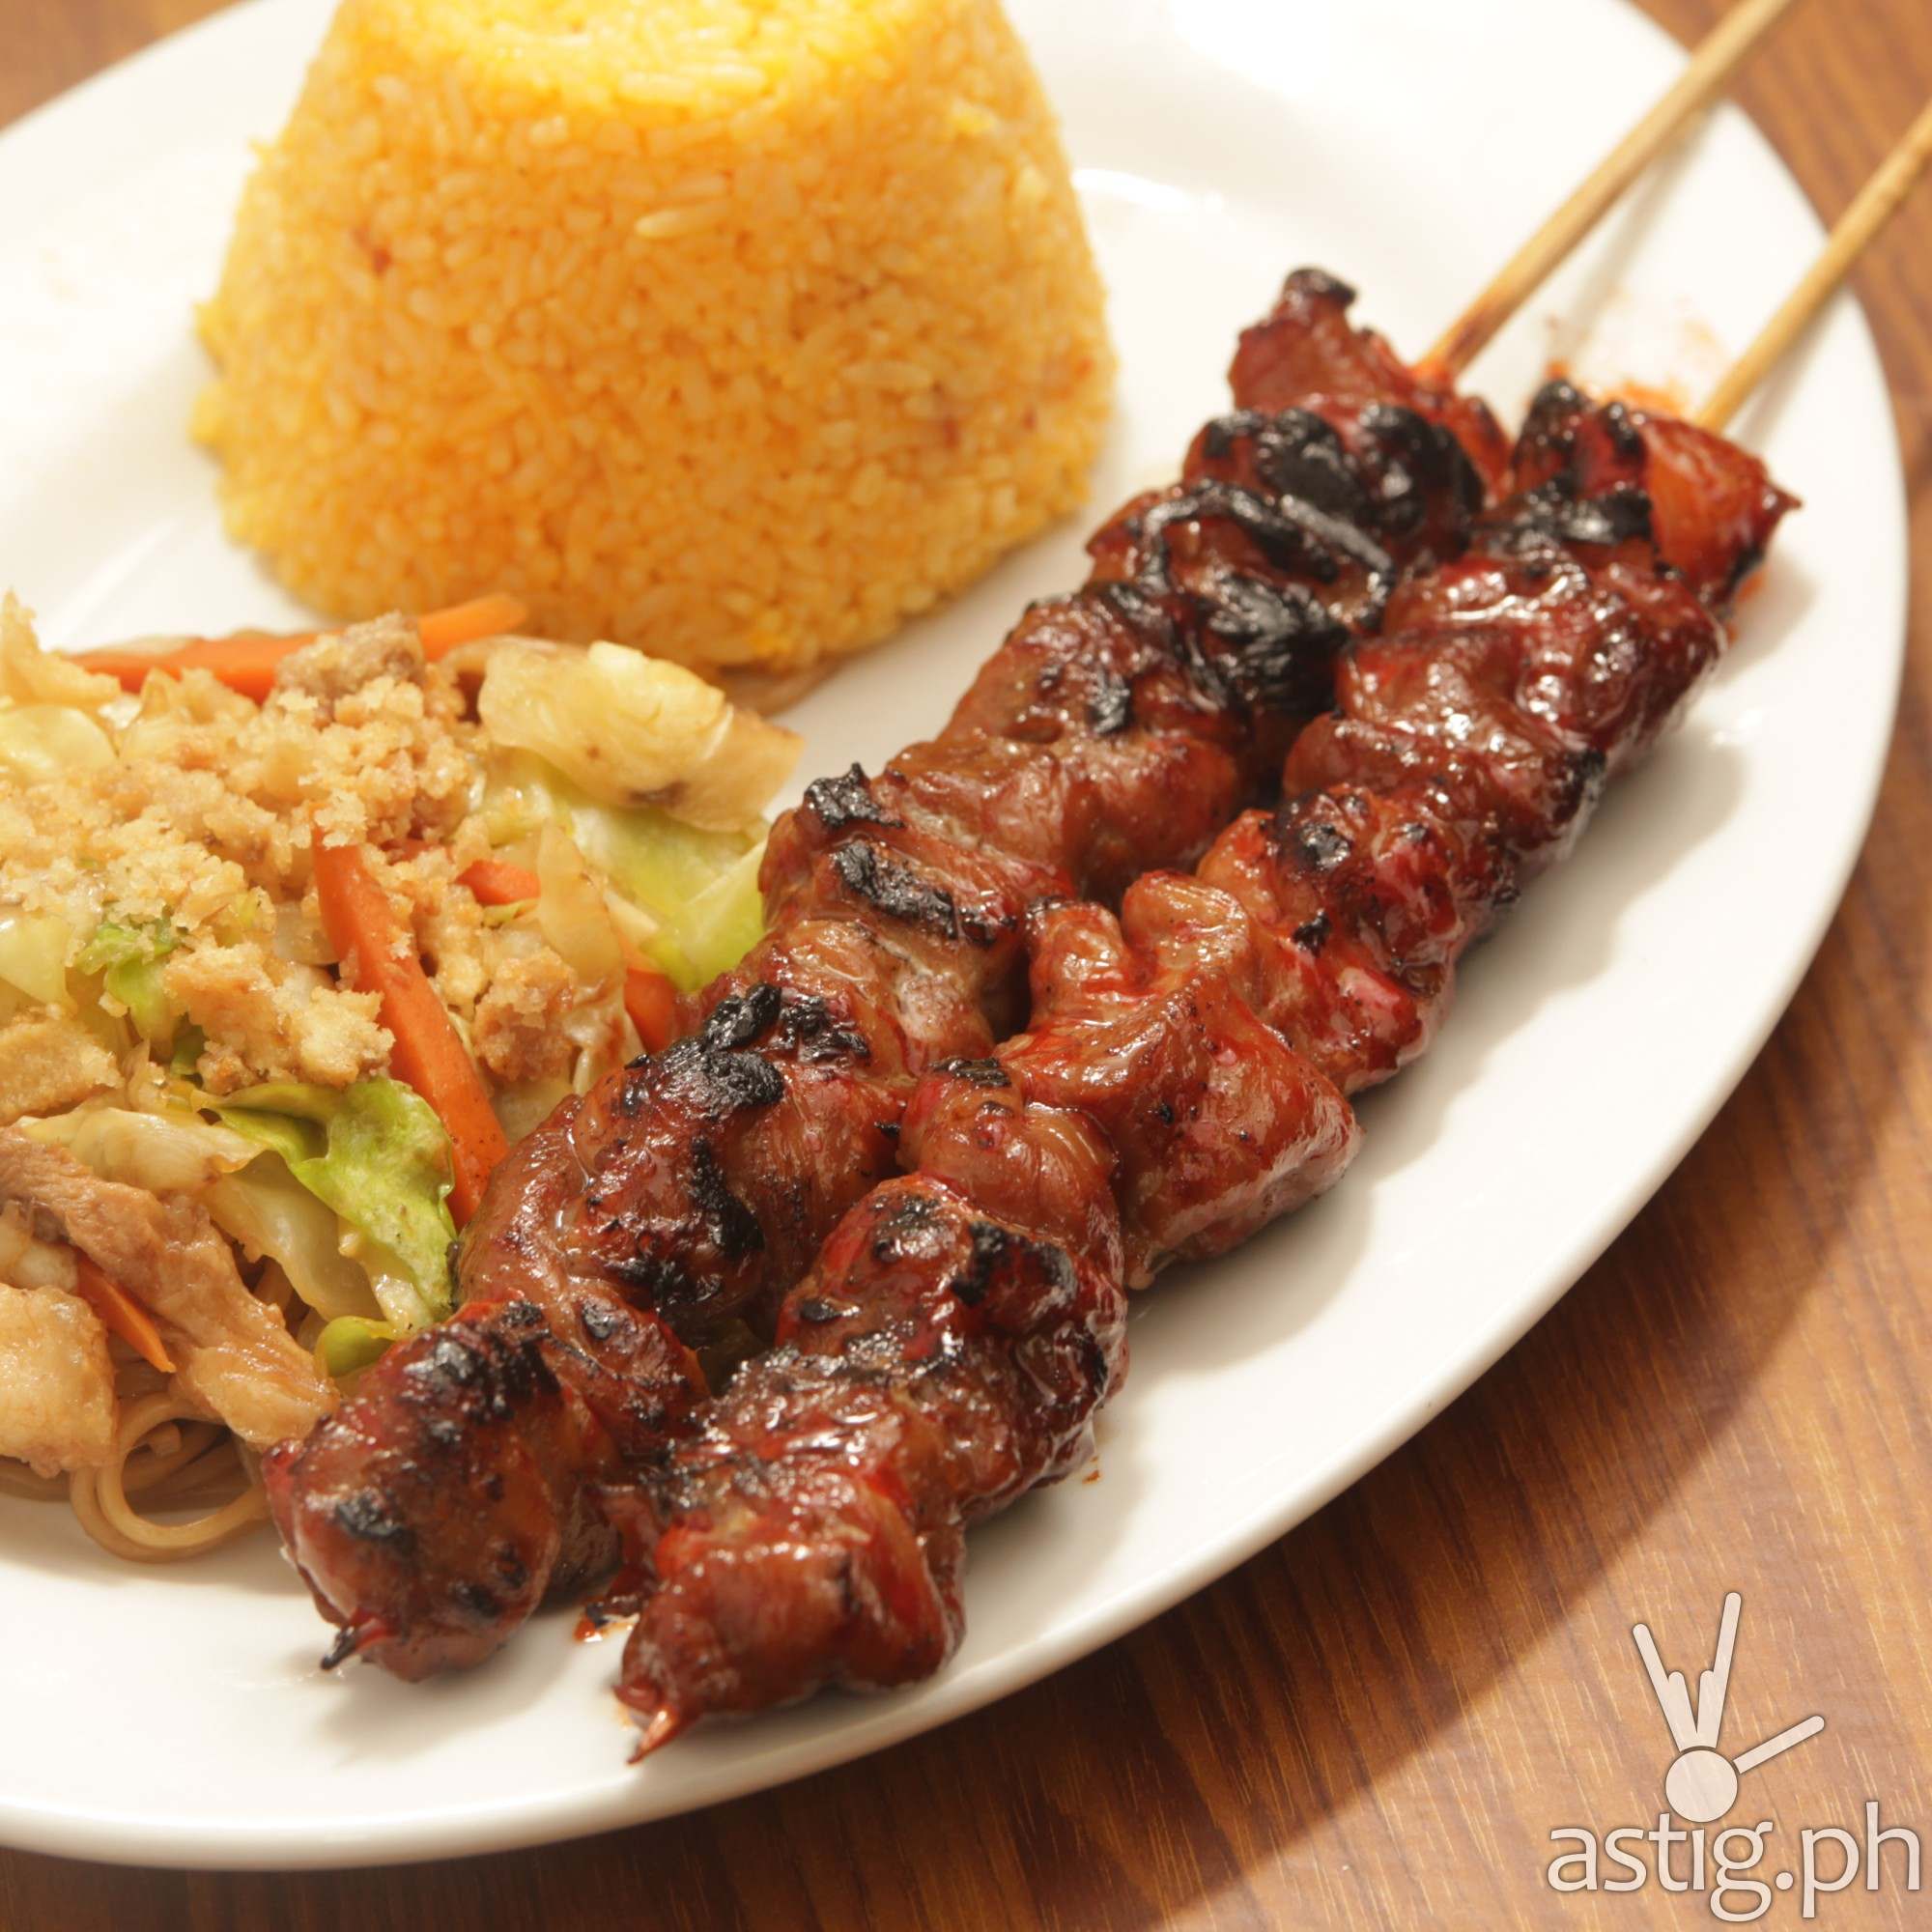 Pork Barbeque Combo Meal, P165